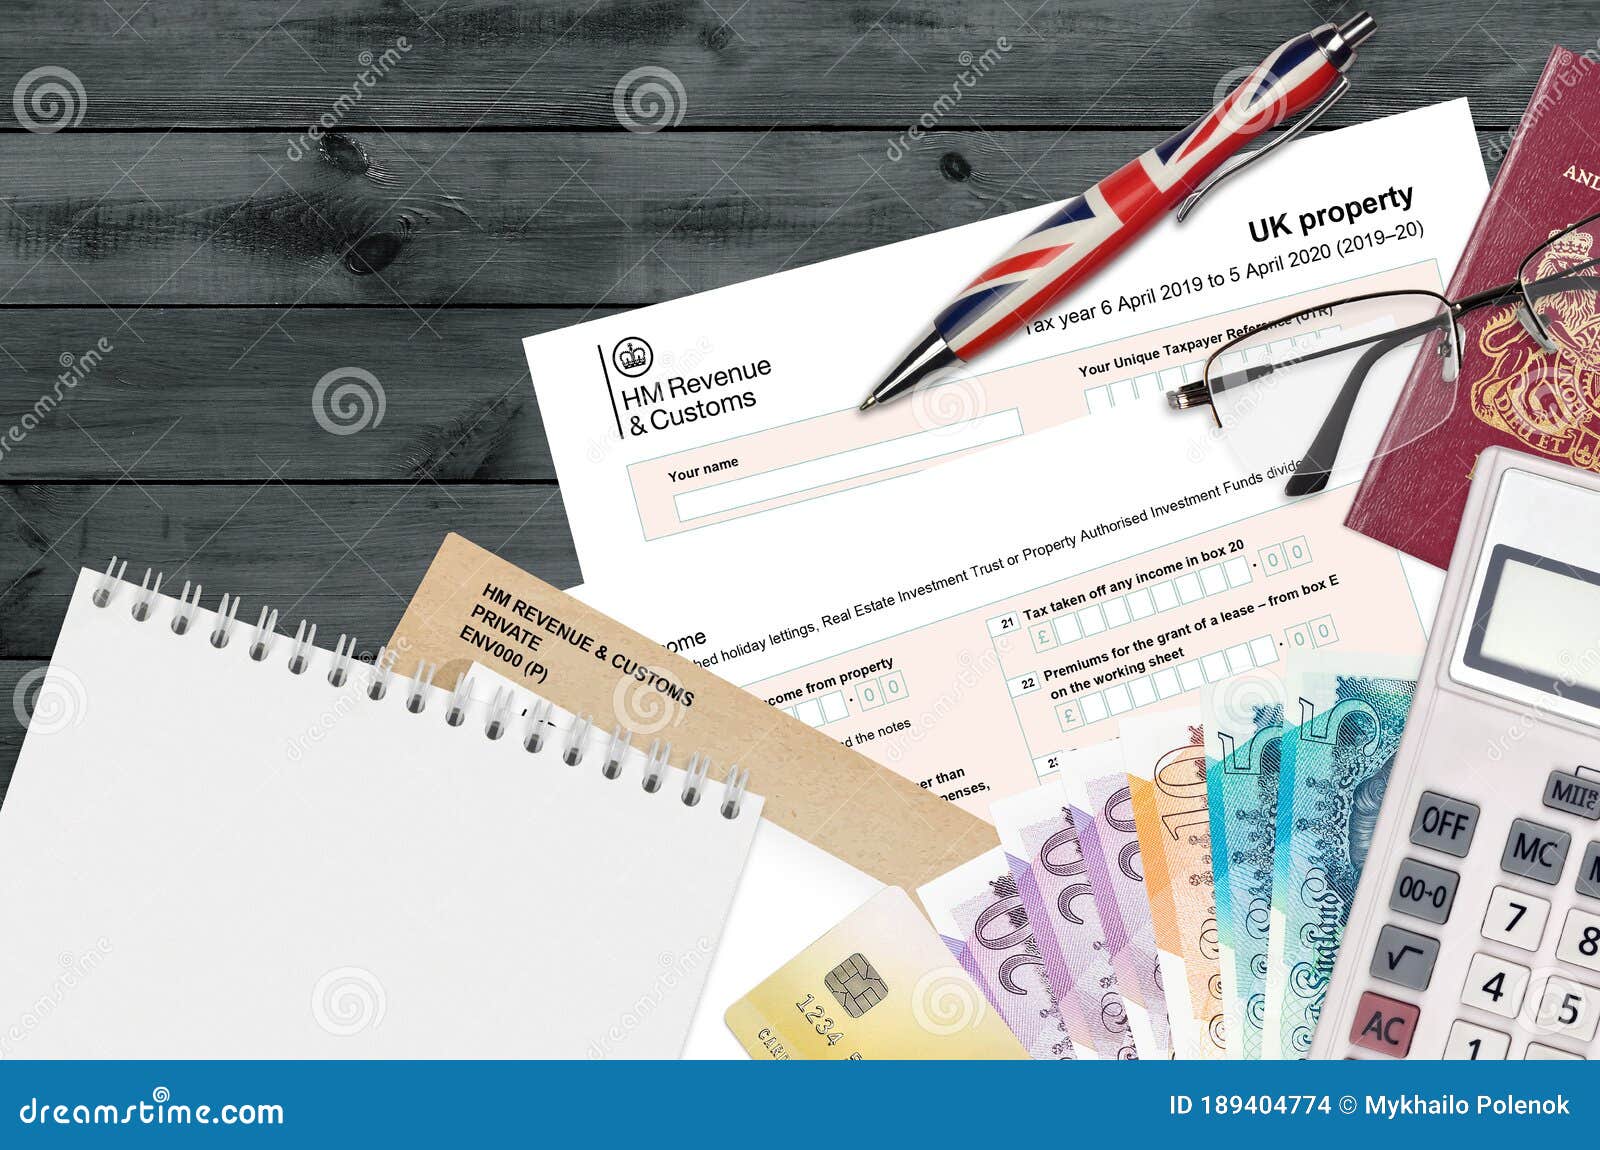 english-tax-form-sa105-uk-property-from-hm-revenue-and-customs-lies-on